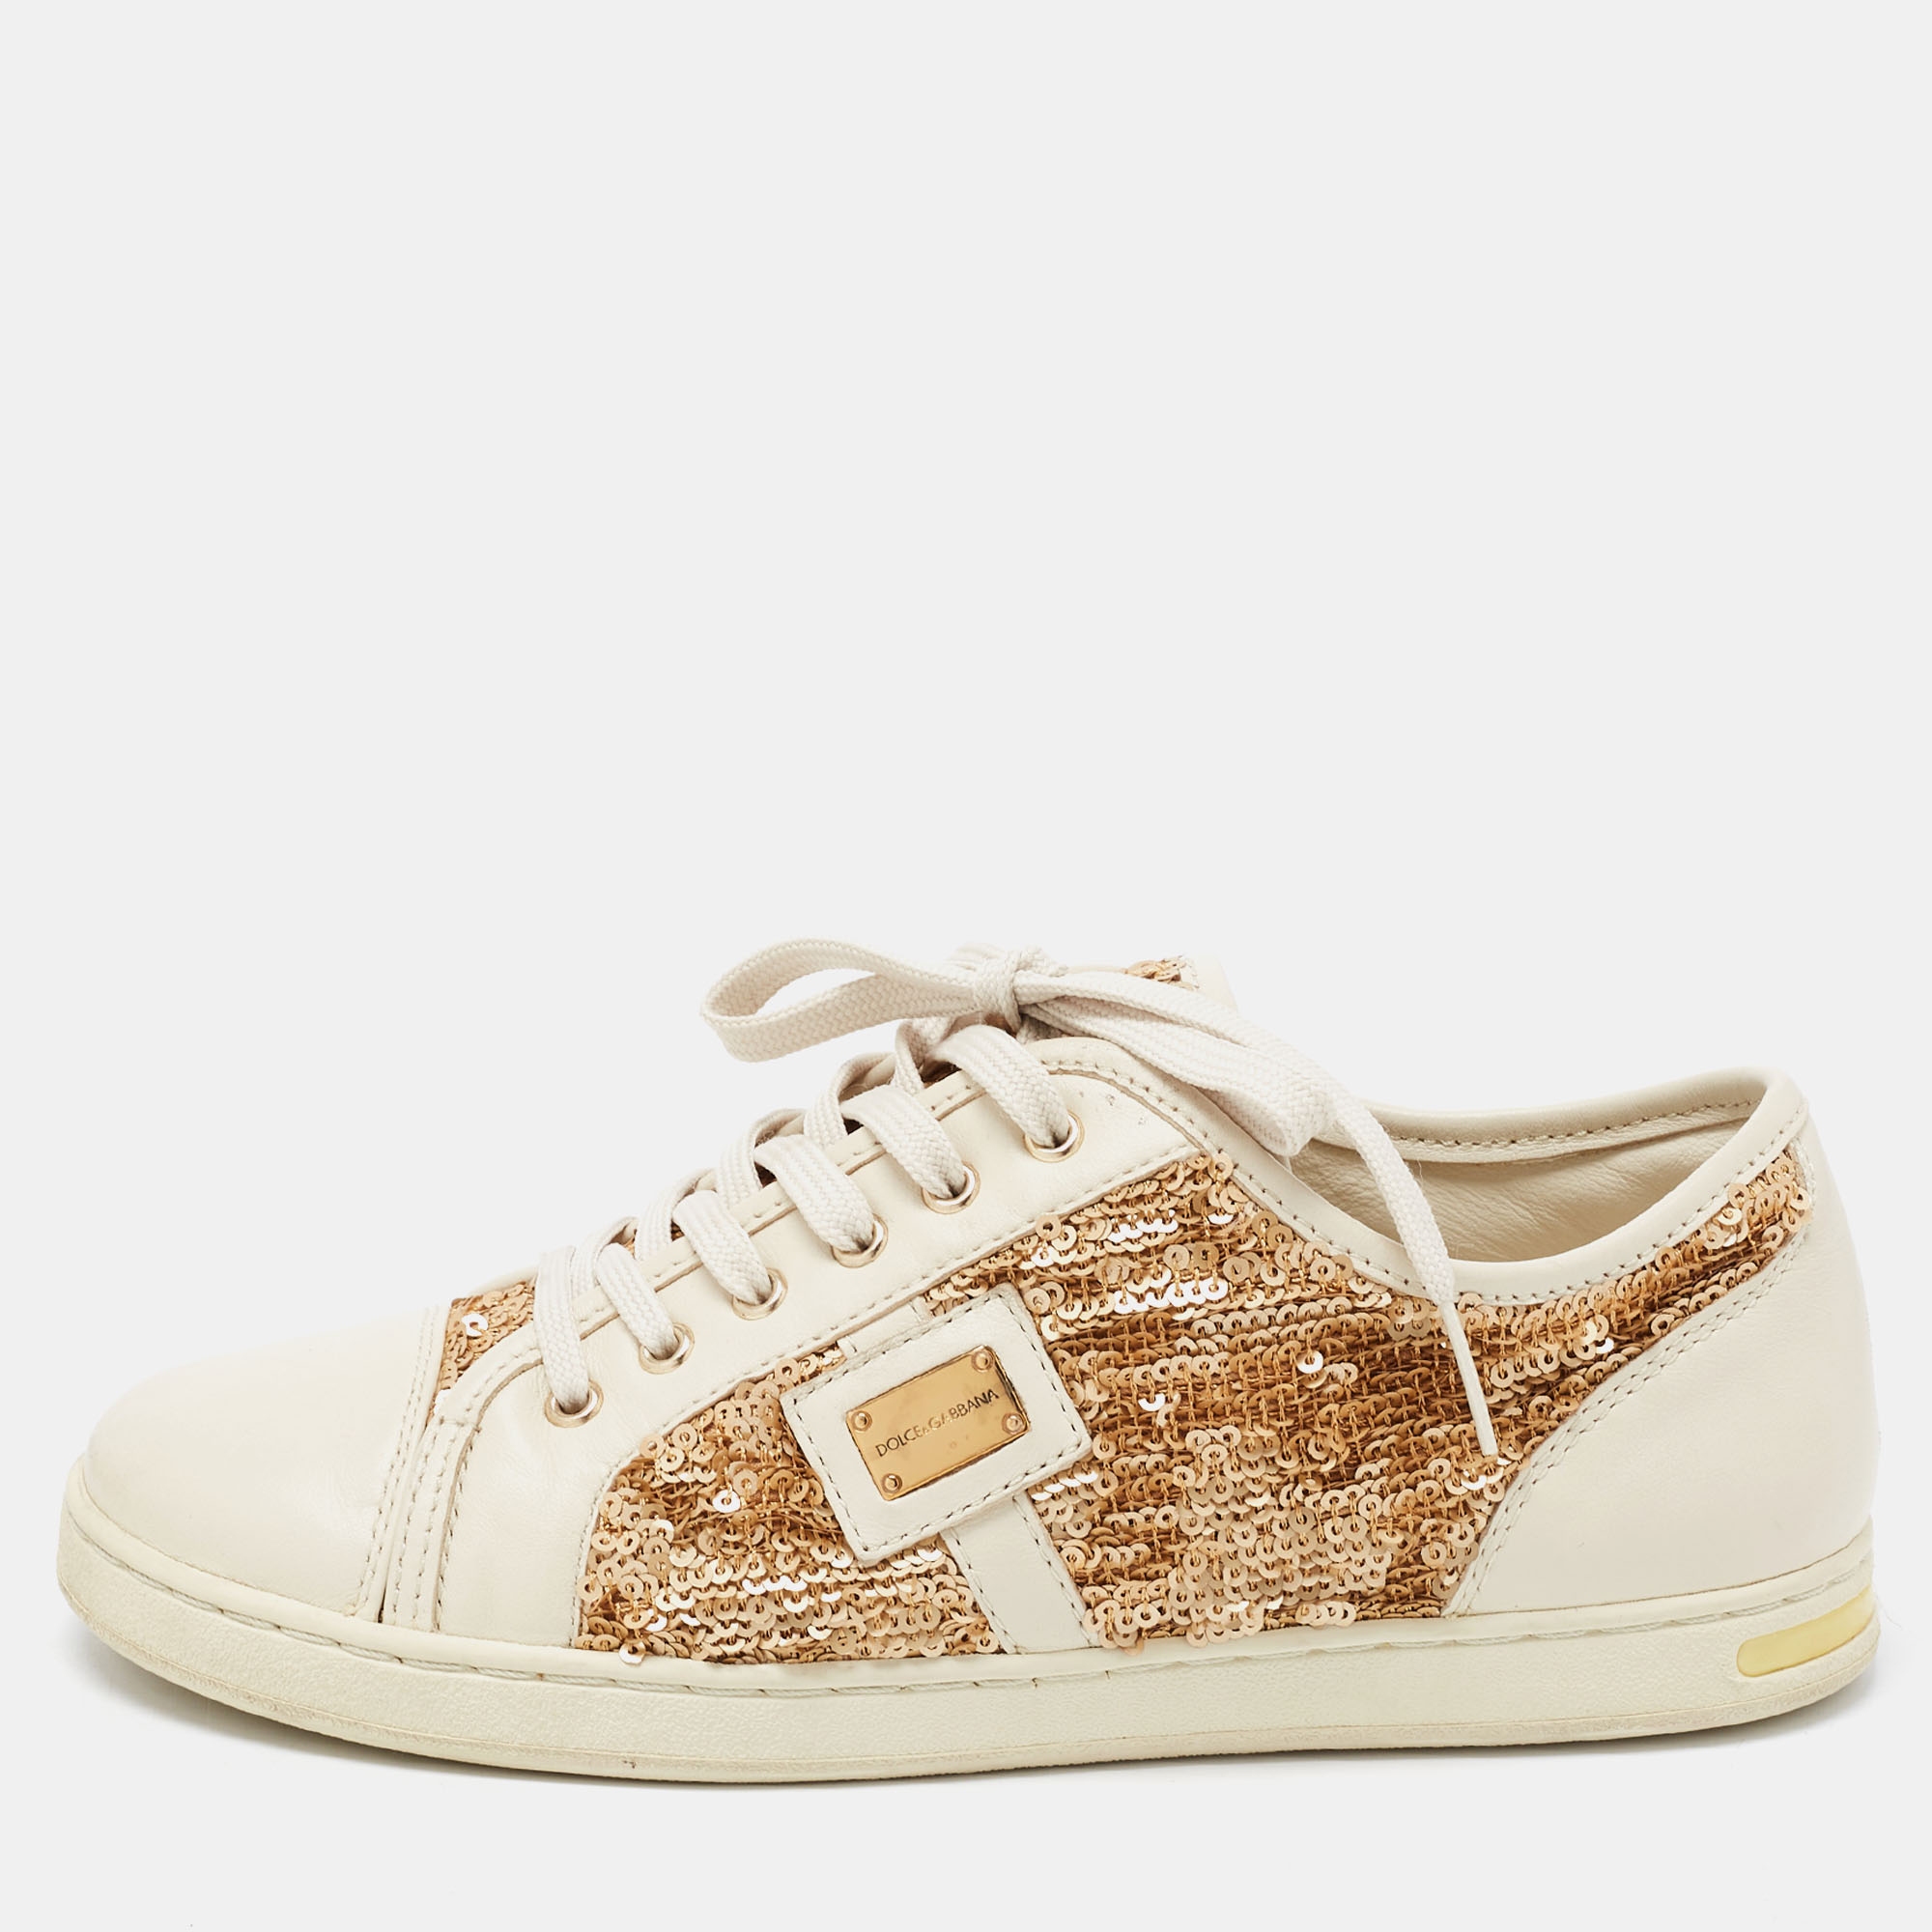 Dolce & Gabbana Cream Leather And Sequin Embellished Low Top Sneakers Size 36